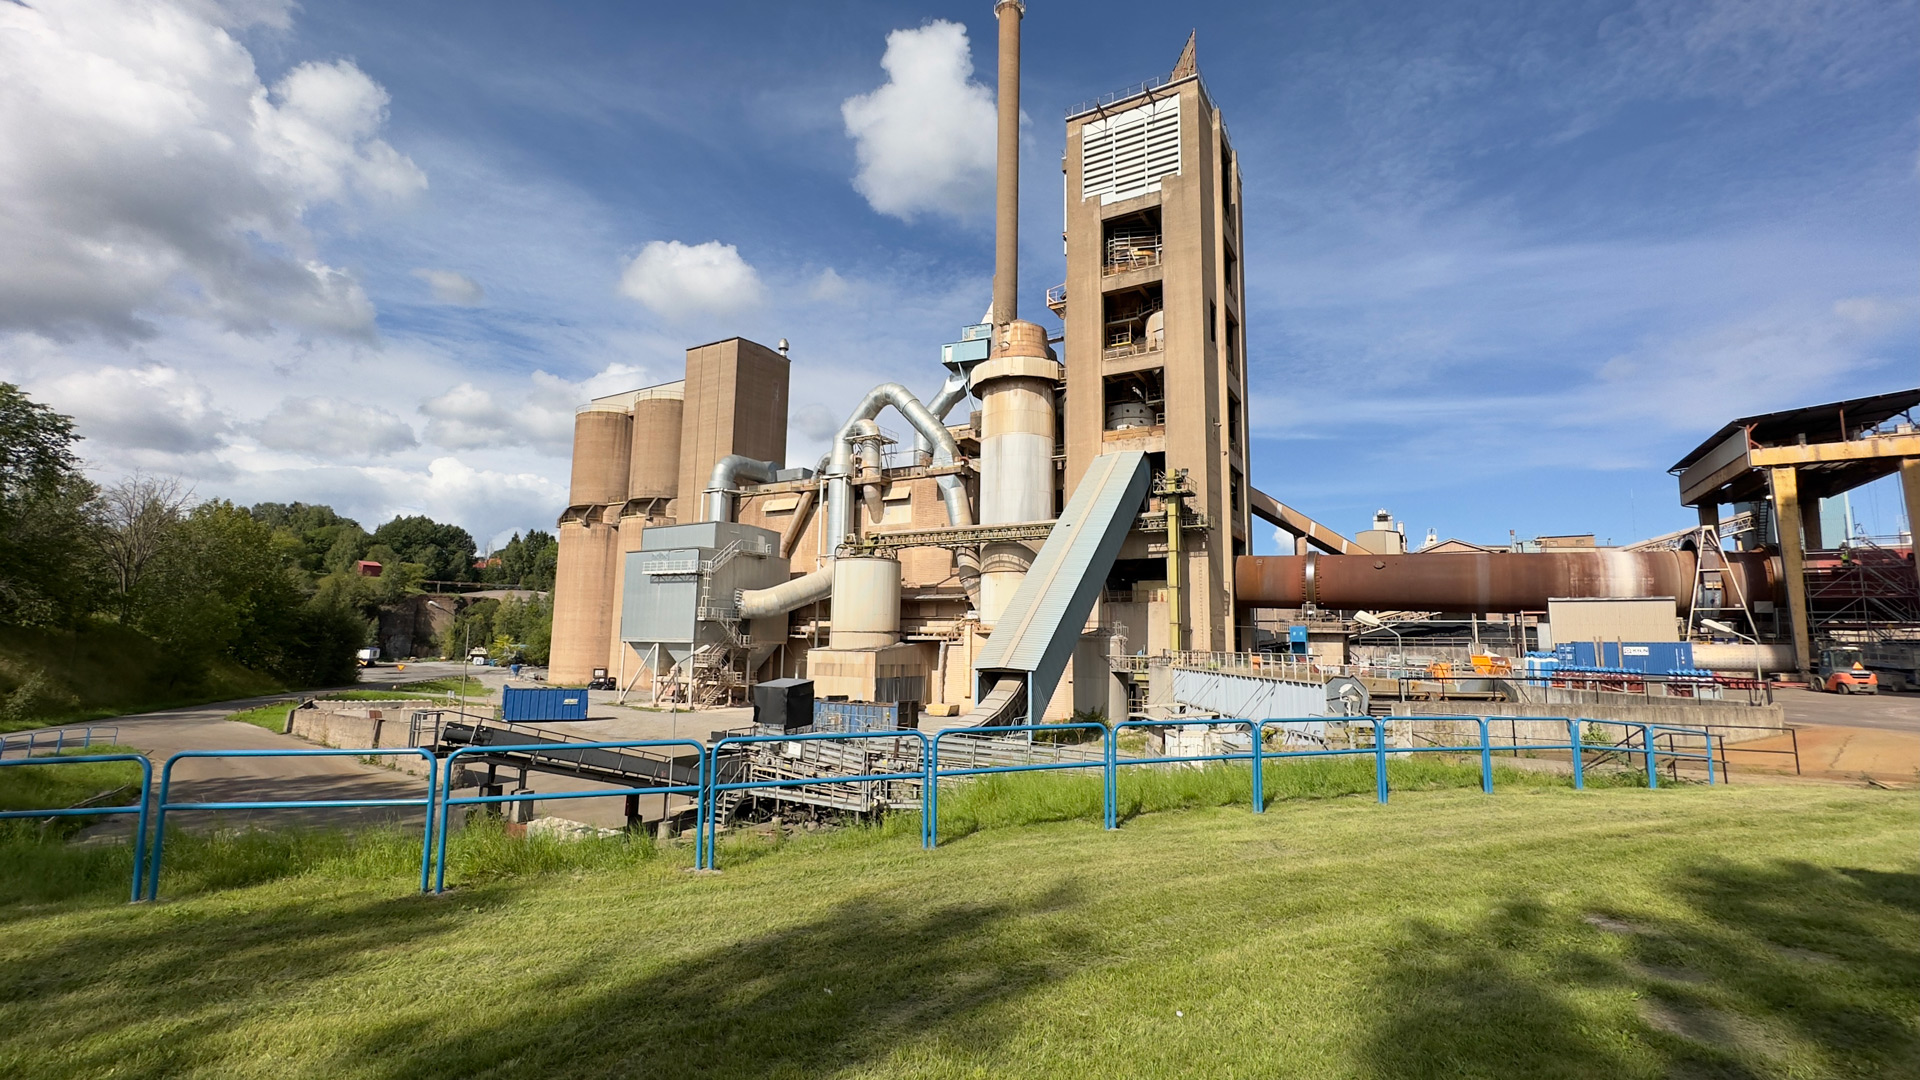 Cement plant in front of a blue sky with white clouds, in front of it a green area